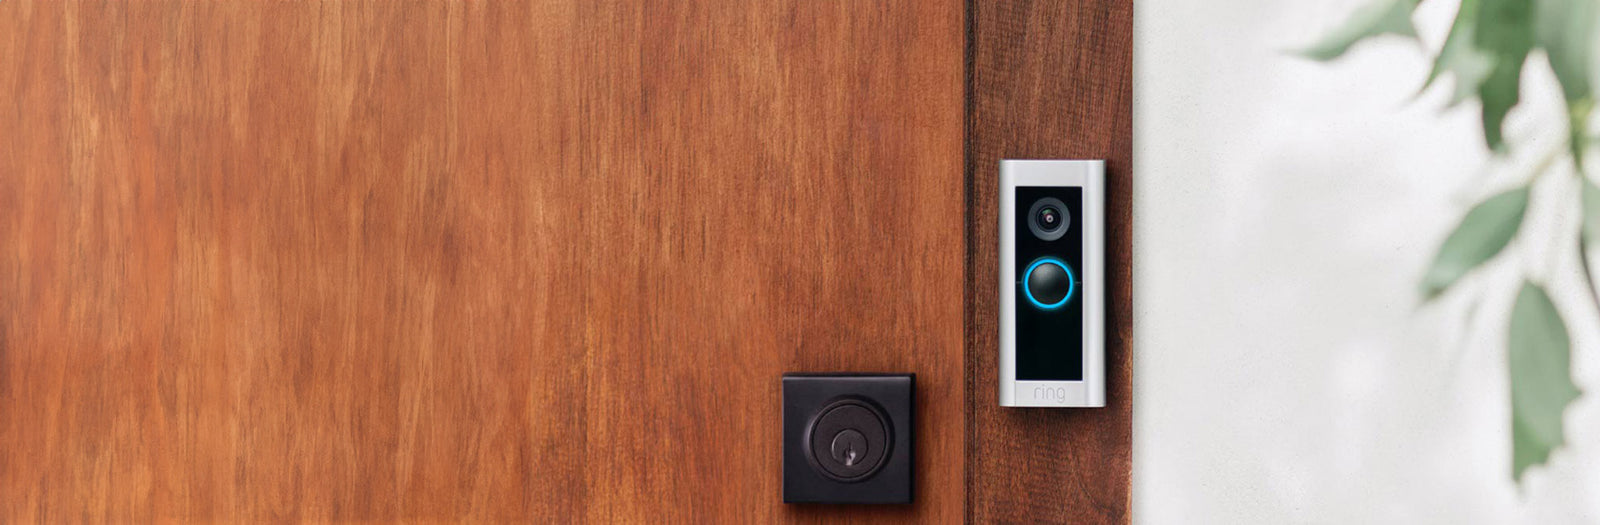 Optimizing Your Ring Doorbell Viewing Angle: A Step-by-Step Guide to Wedge Installation